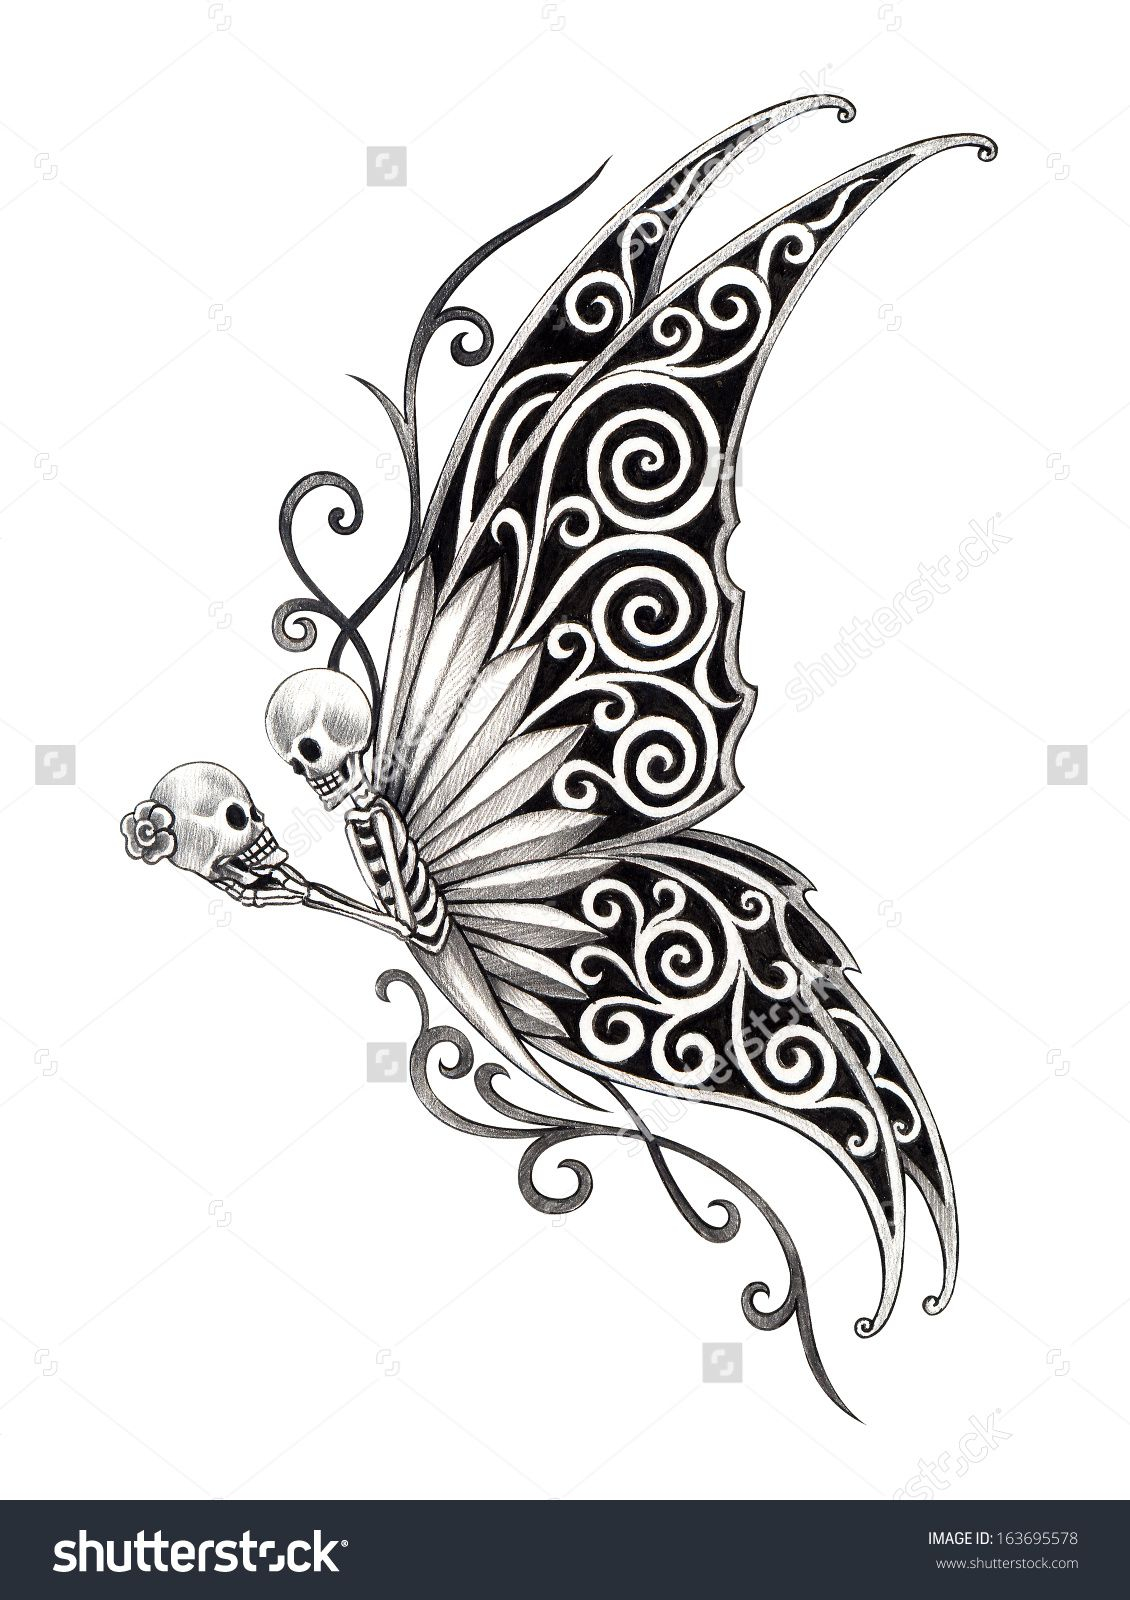 Image Result For Skull Butterfly Tattoo Skull Butterfly Tattoo for proportions 1130 X 1600